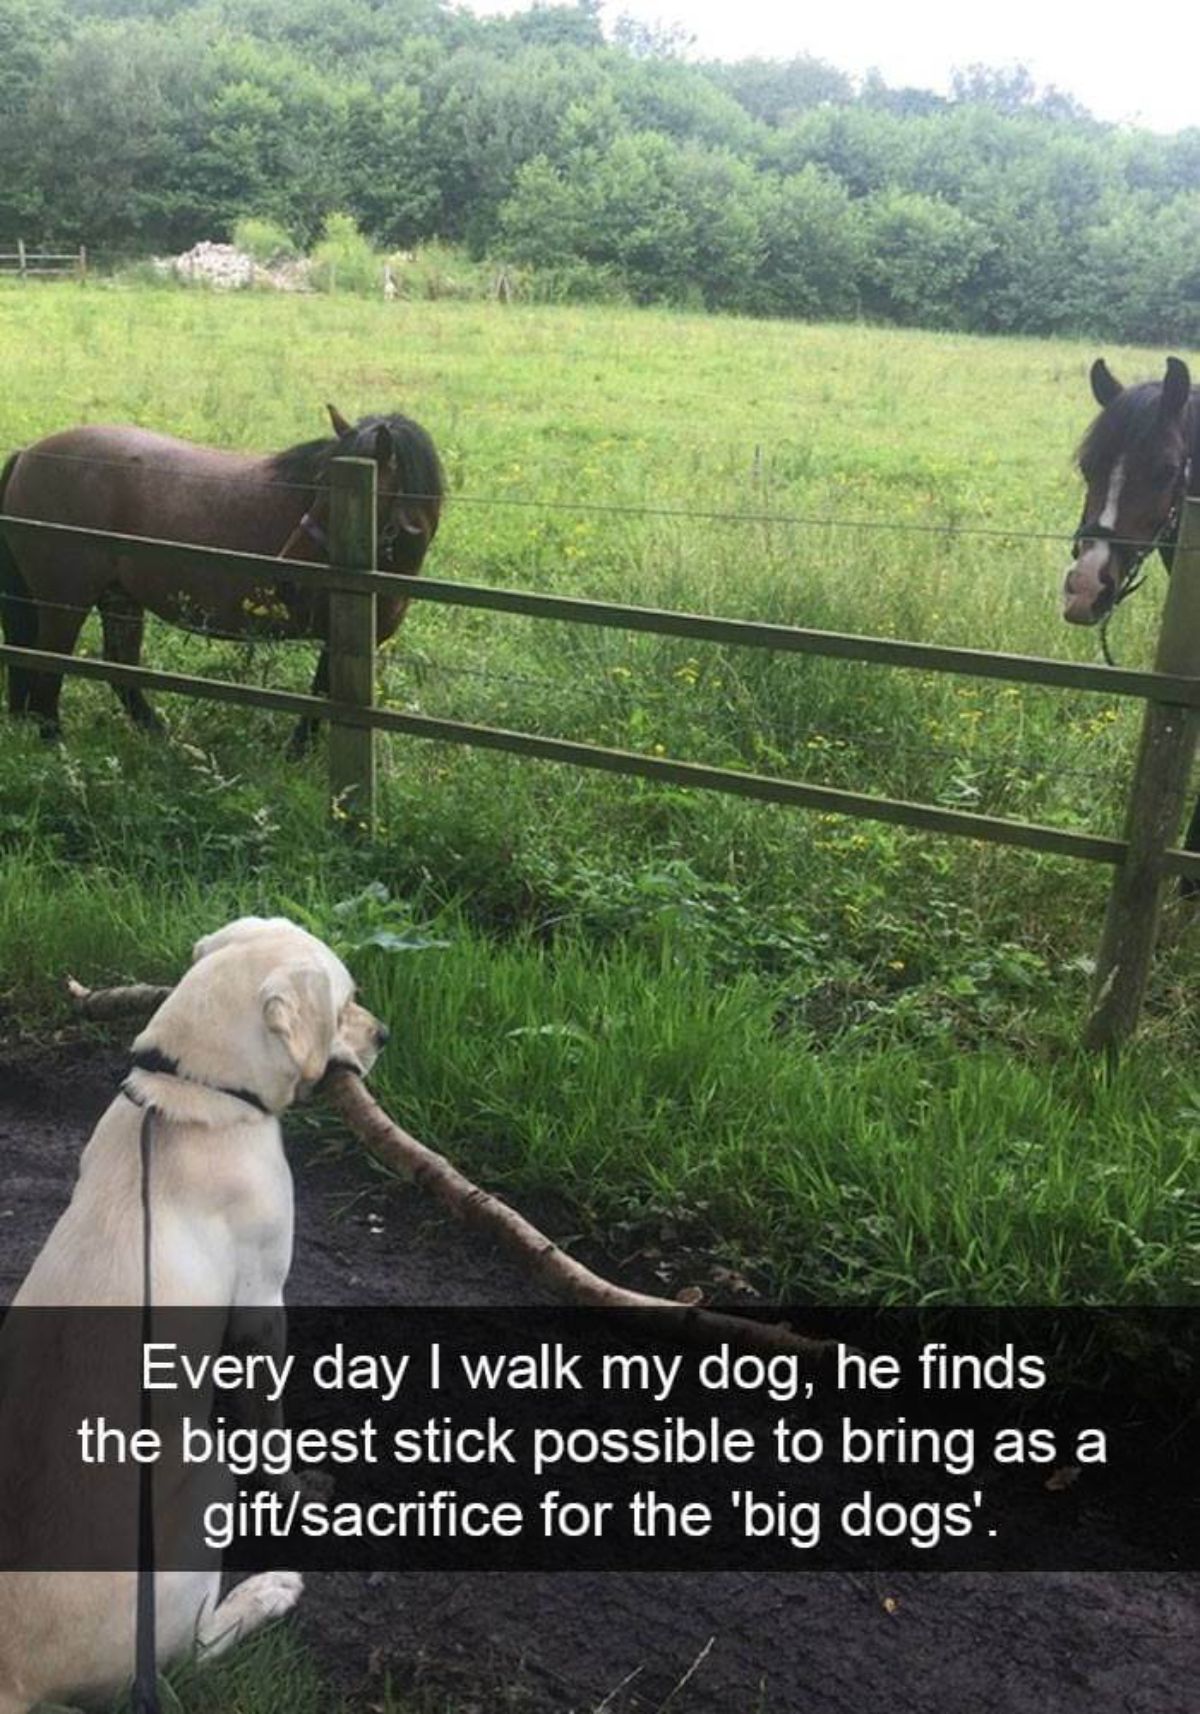 yellow labrador sitting holding a large branch in front of 2 brown horses in a field behind a wooden fence with a caption saying ever day i walk my dog, he dings the biggest stick possible to bring as a gift/sacrifice for the 'big dogs'